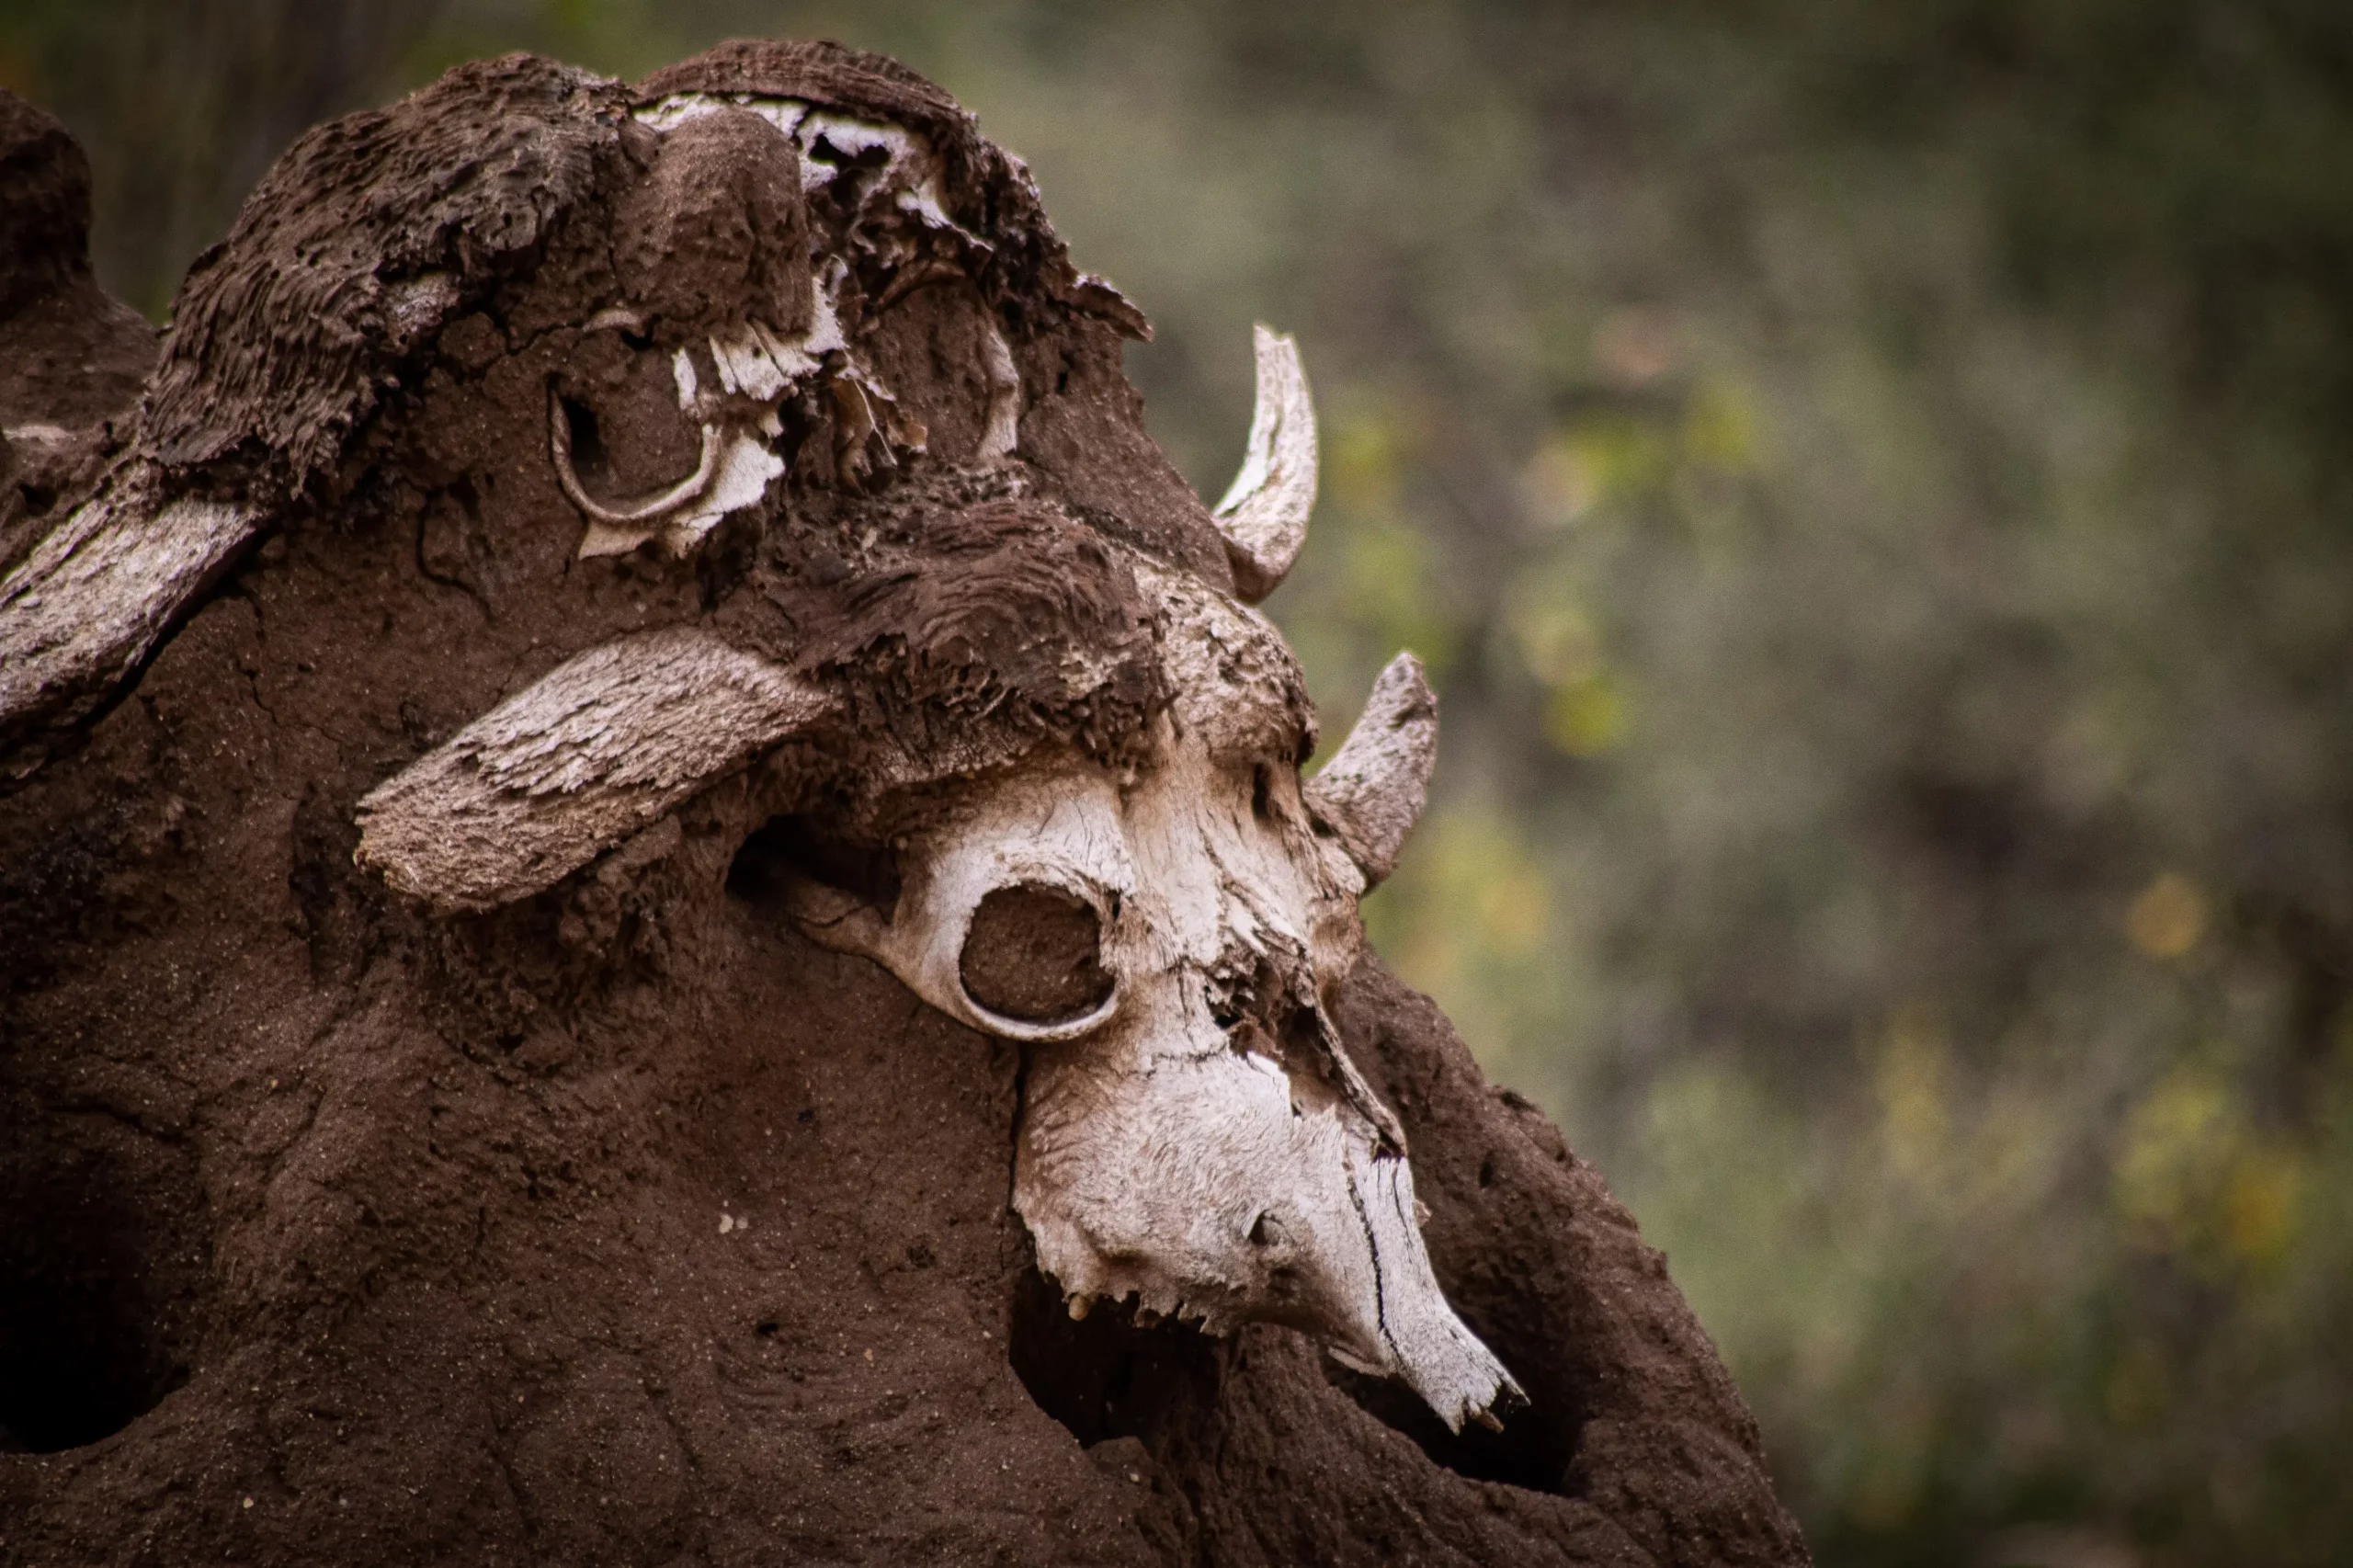 skulls of animals which have been hunted by lions or tigers, spotted in Tanzanian safari jungles.